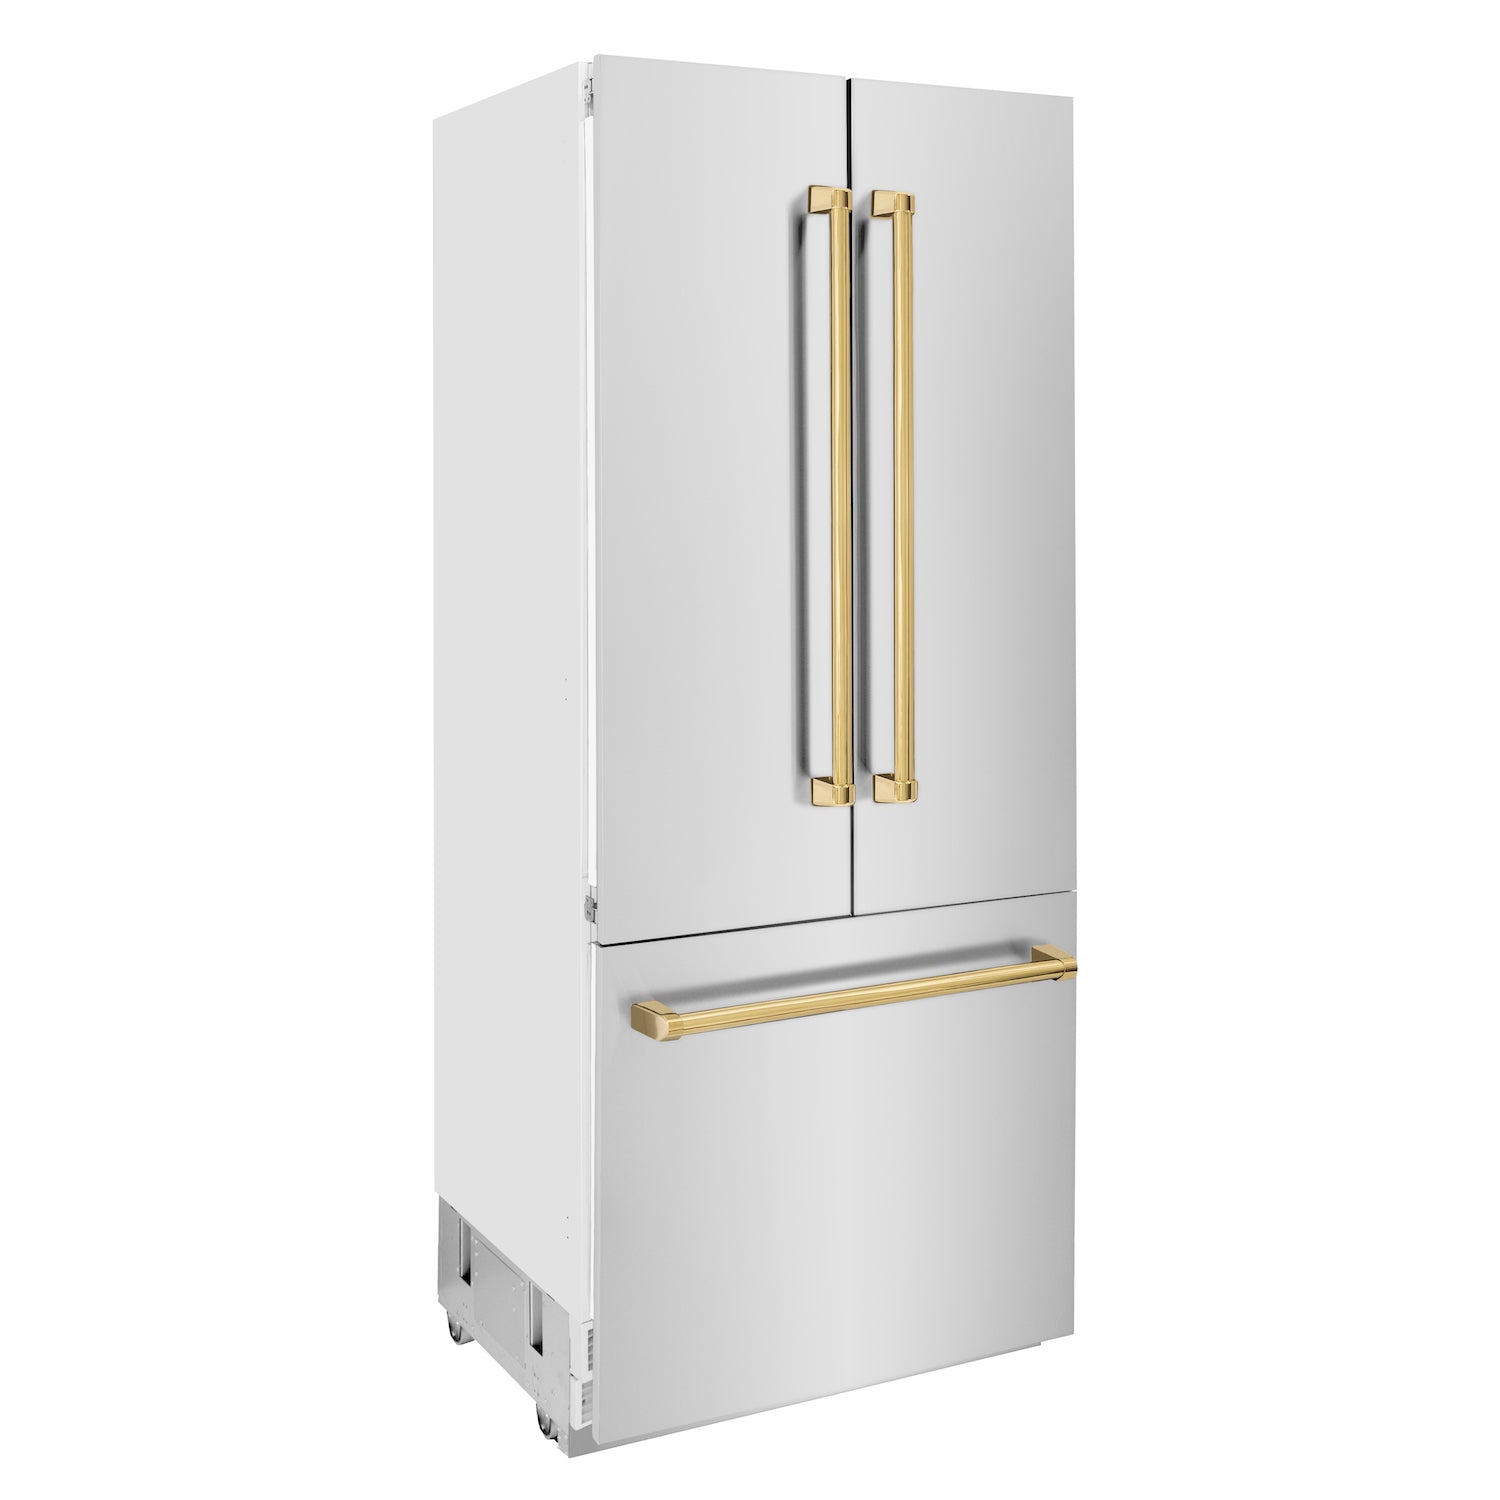 ZLINE 36" Autograph Edition Built-in Refrigerator with Accent Handle side.